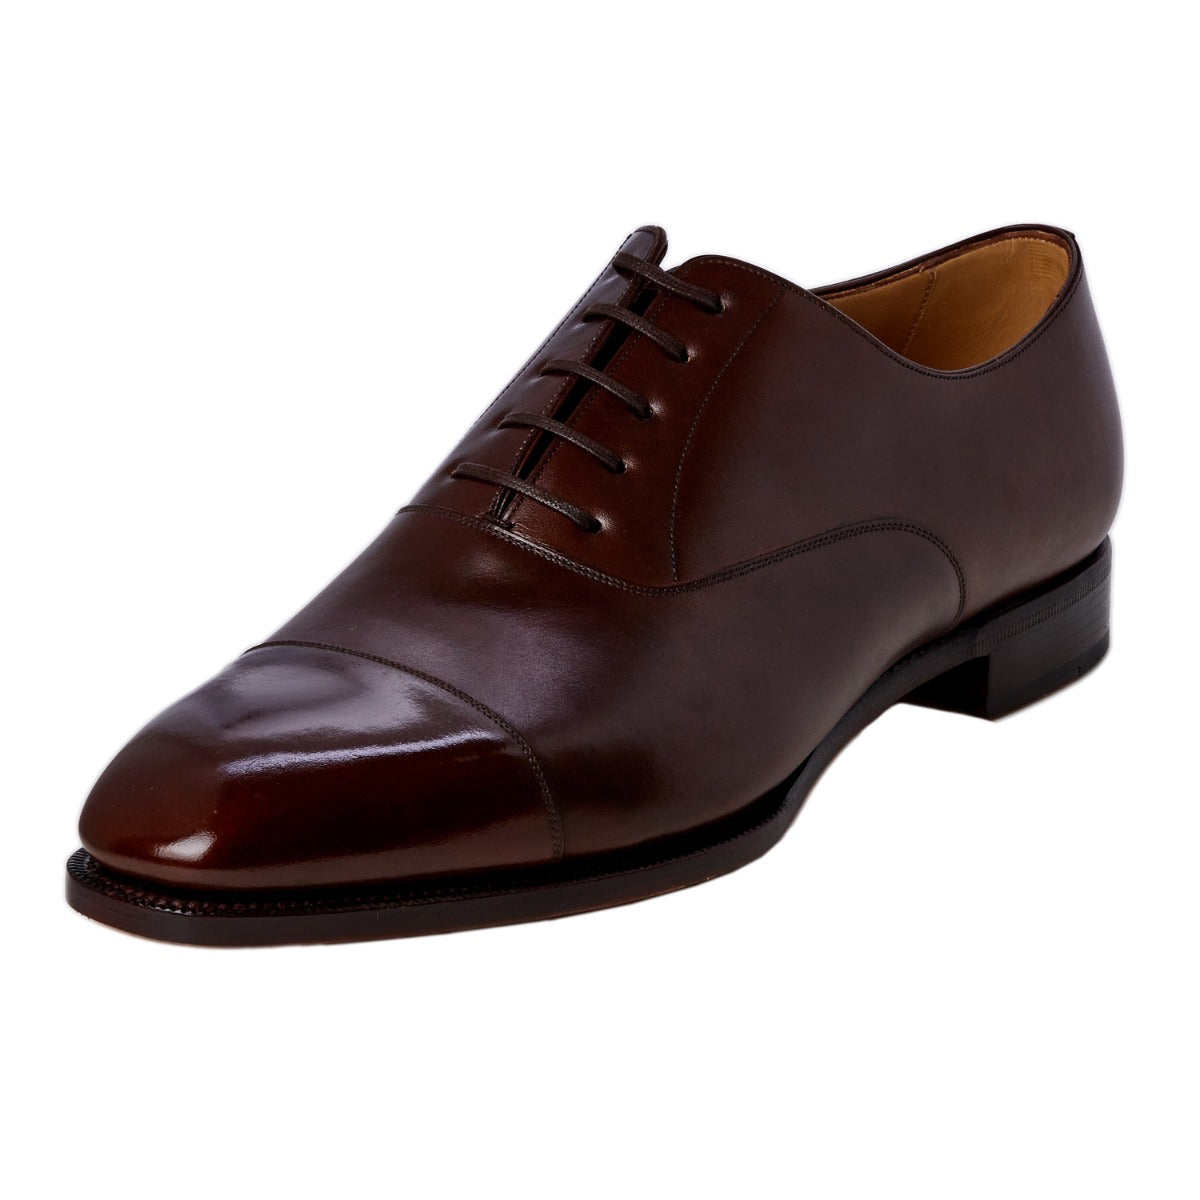 A TLB Dark Brown Captoe Oxford 10UK shoe on a white background proudly made-to-order from KirbyAllison.com.